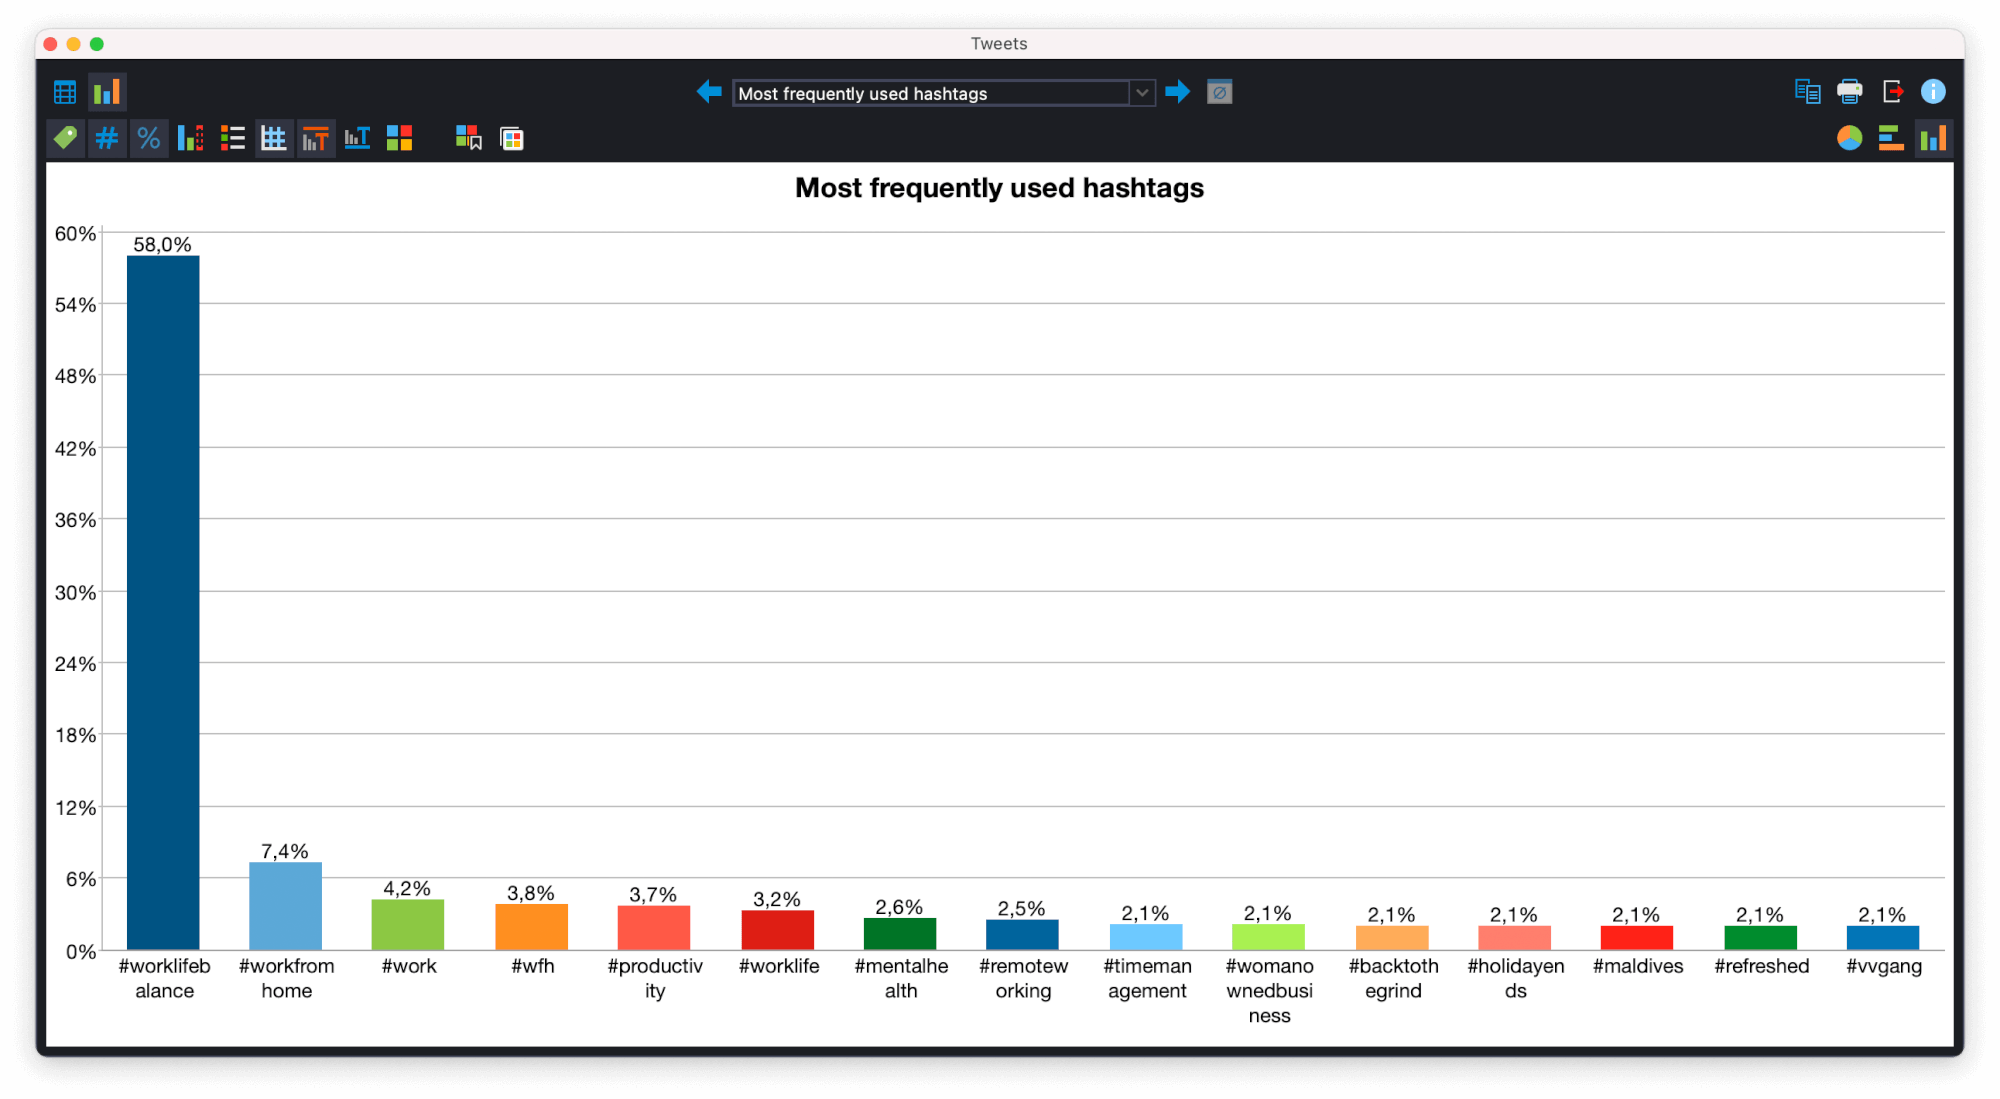 Screenshot from MAXQDA2020 showing a table of the most frequently used hashtags in regards to work/life balance.